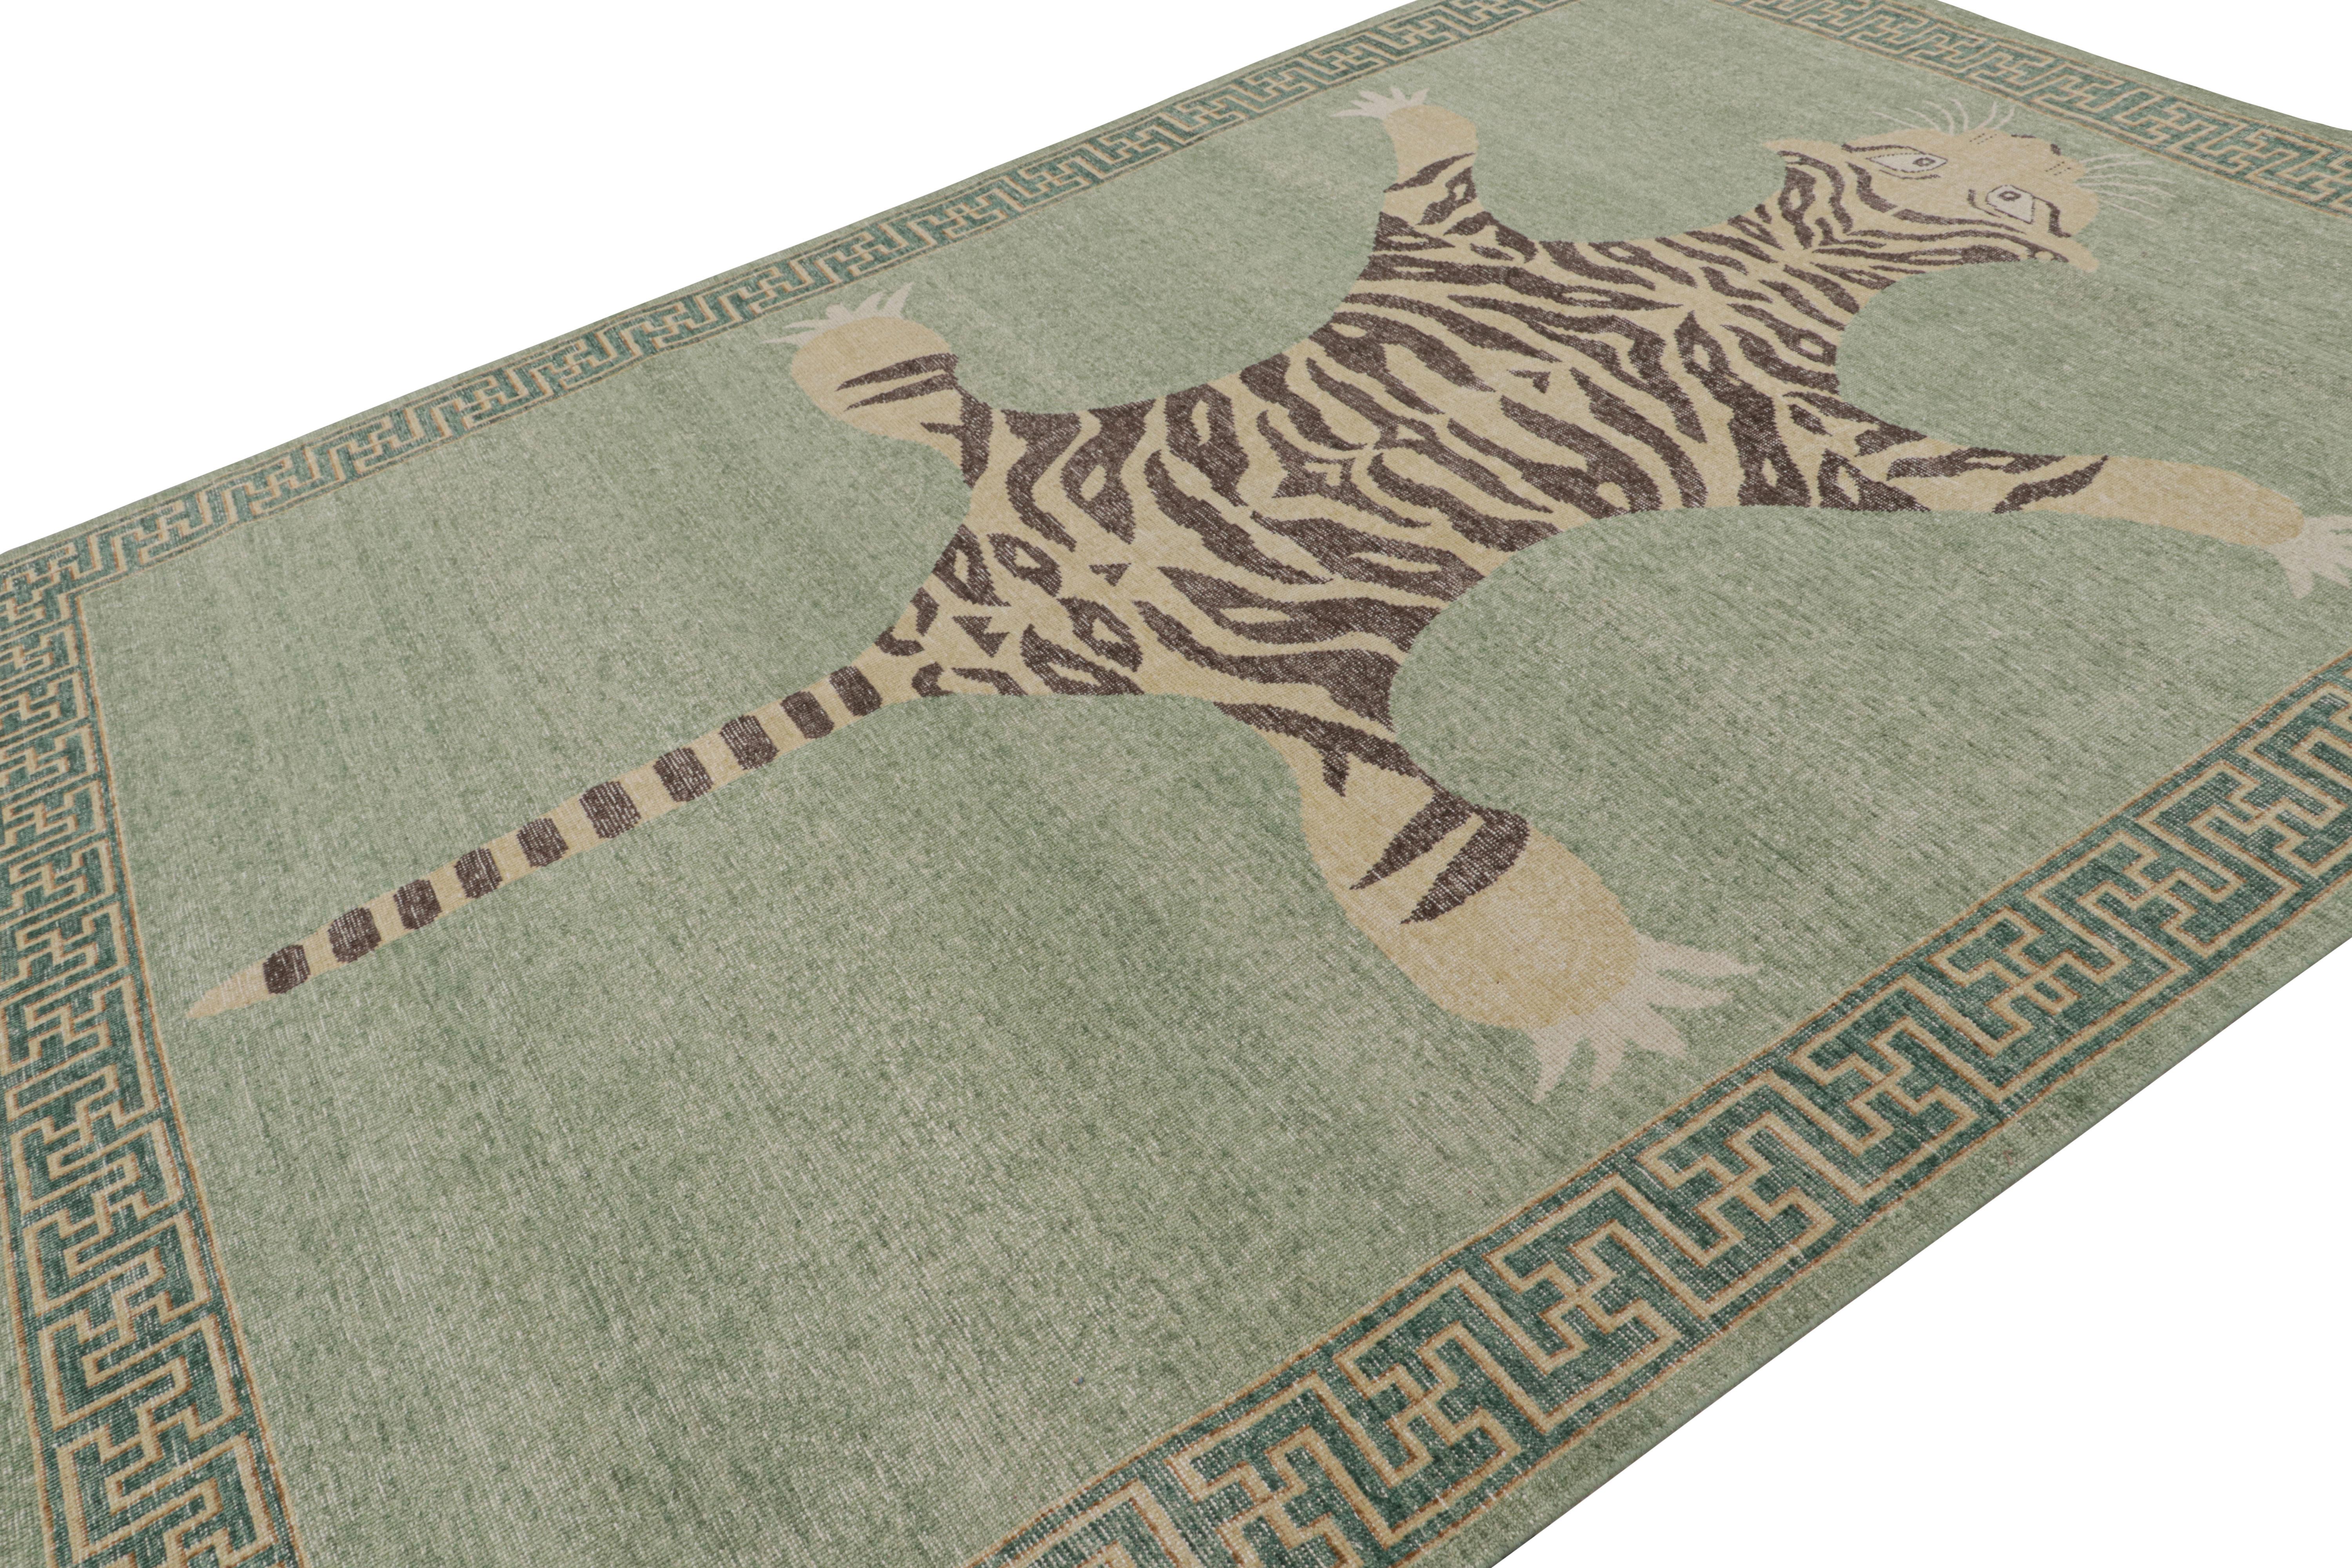 Hand-knotted in wool, this 9x12 modern tiger pictorial rug is from Rug & Kilim’s Homage collection. 

On the Design: 

Keen eyes will enjoy beige-brown tiger representation on a spacious green field. A regal piece with a majestic, dramatic